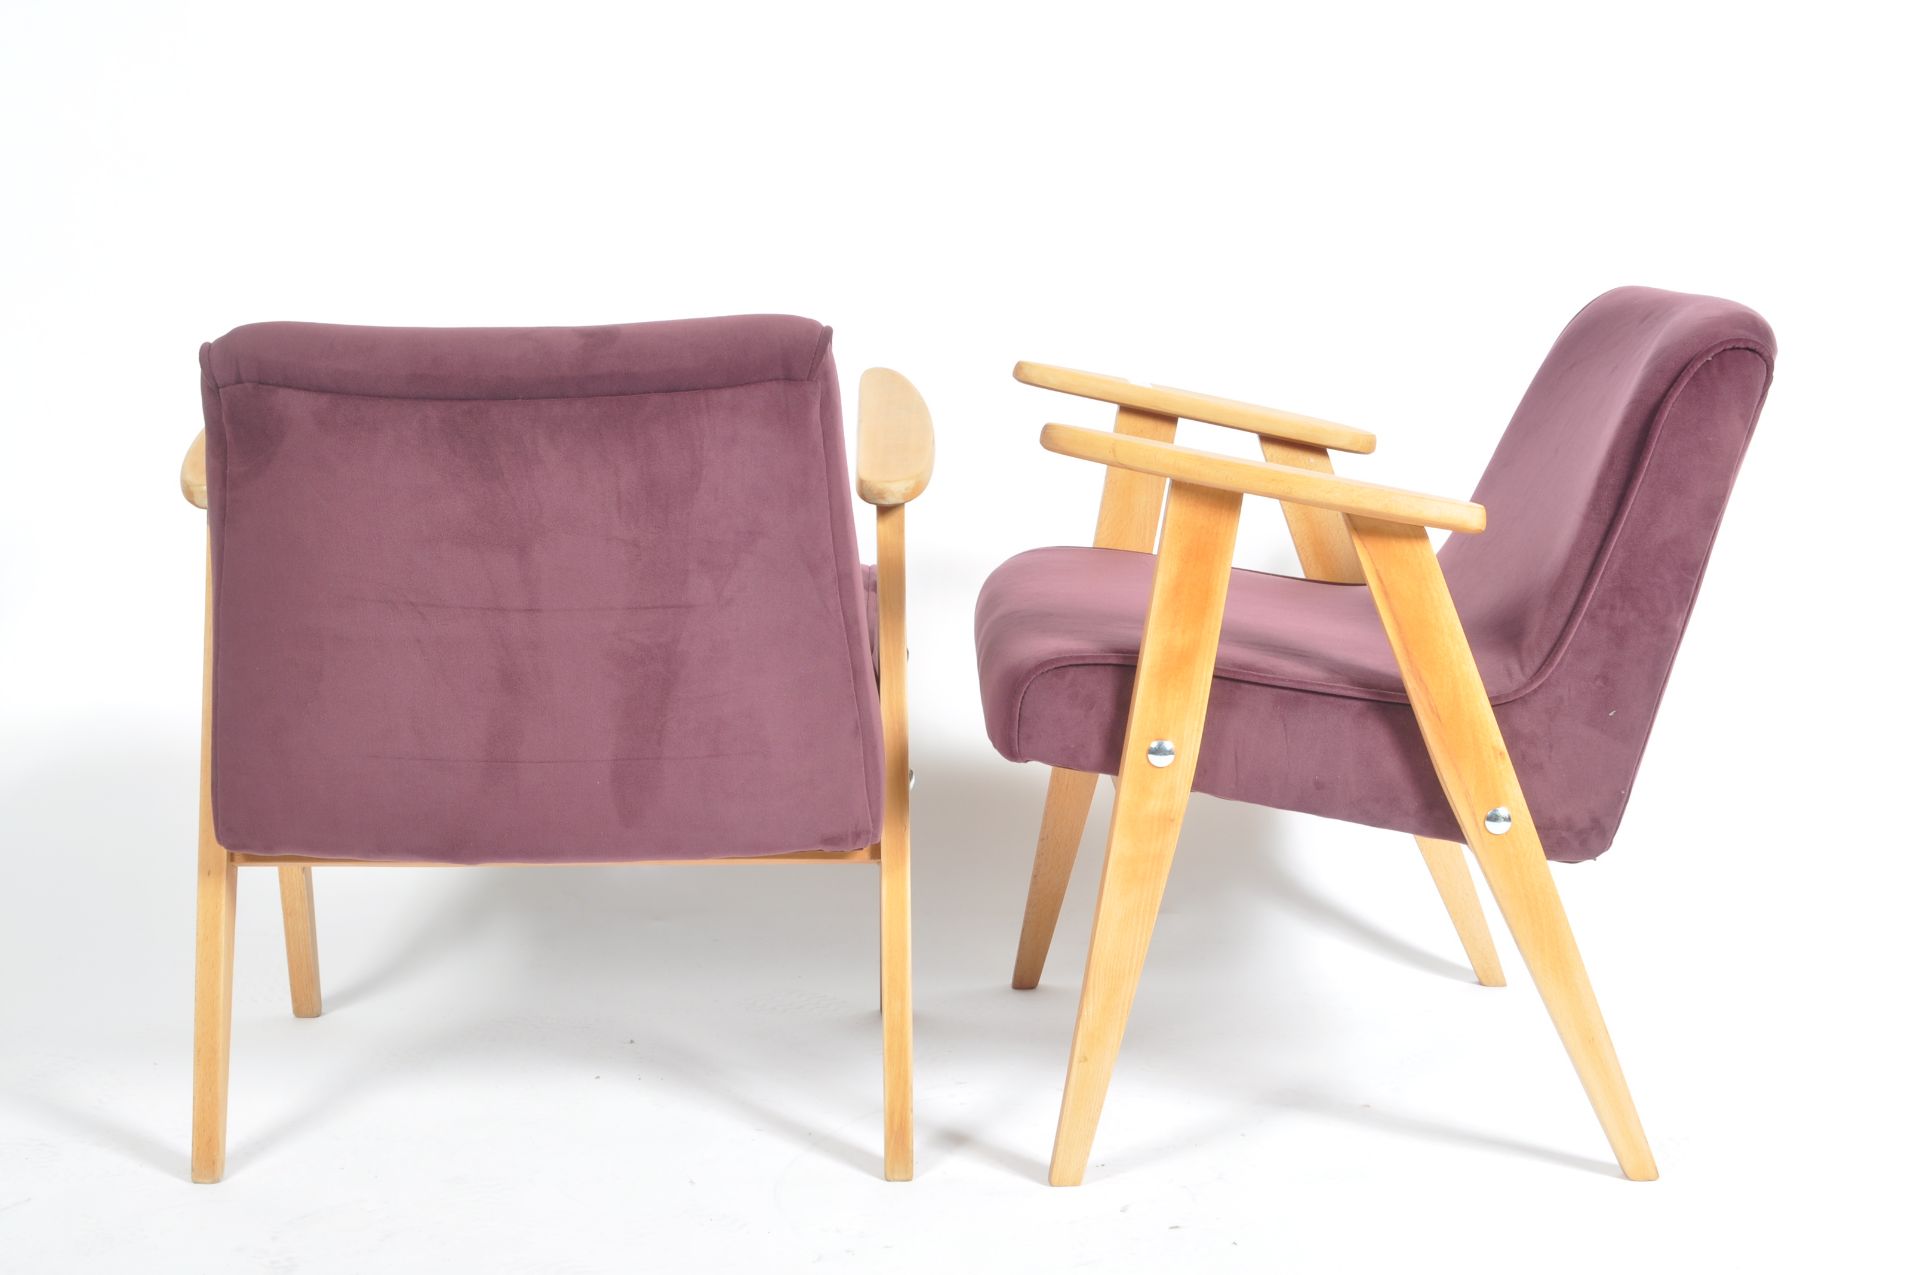 MATCHING PAIR OF MID CENTURY A-FRAME OAK CHAIRS - Image 5 of 6